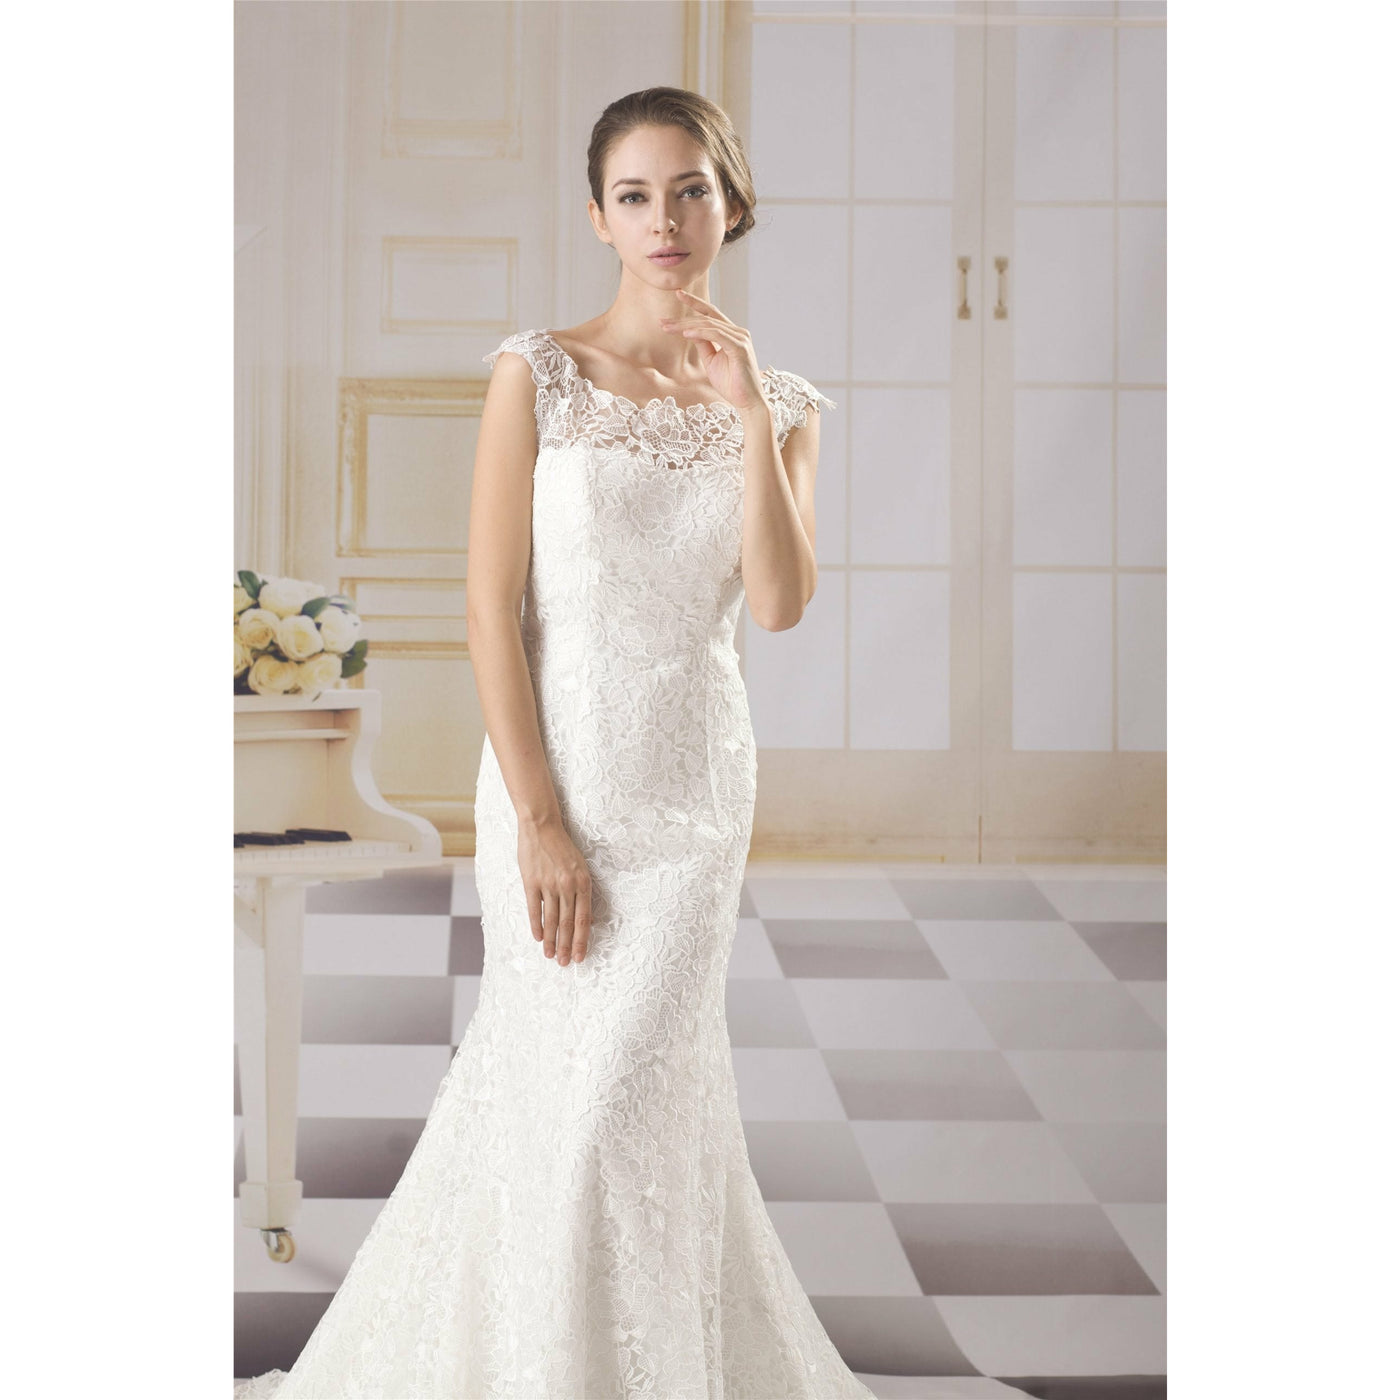 Chicely allover floral lace mermaid wedding dress1